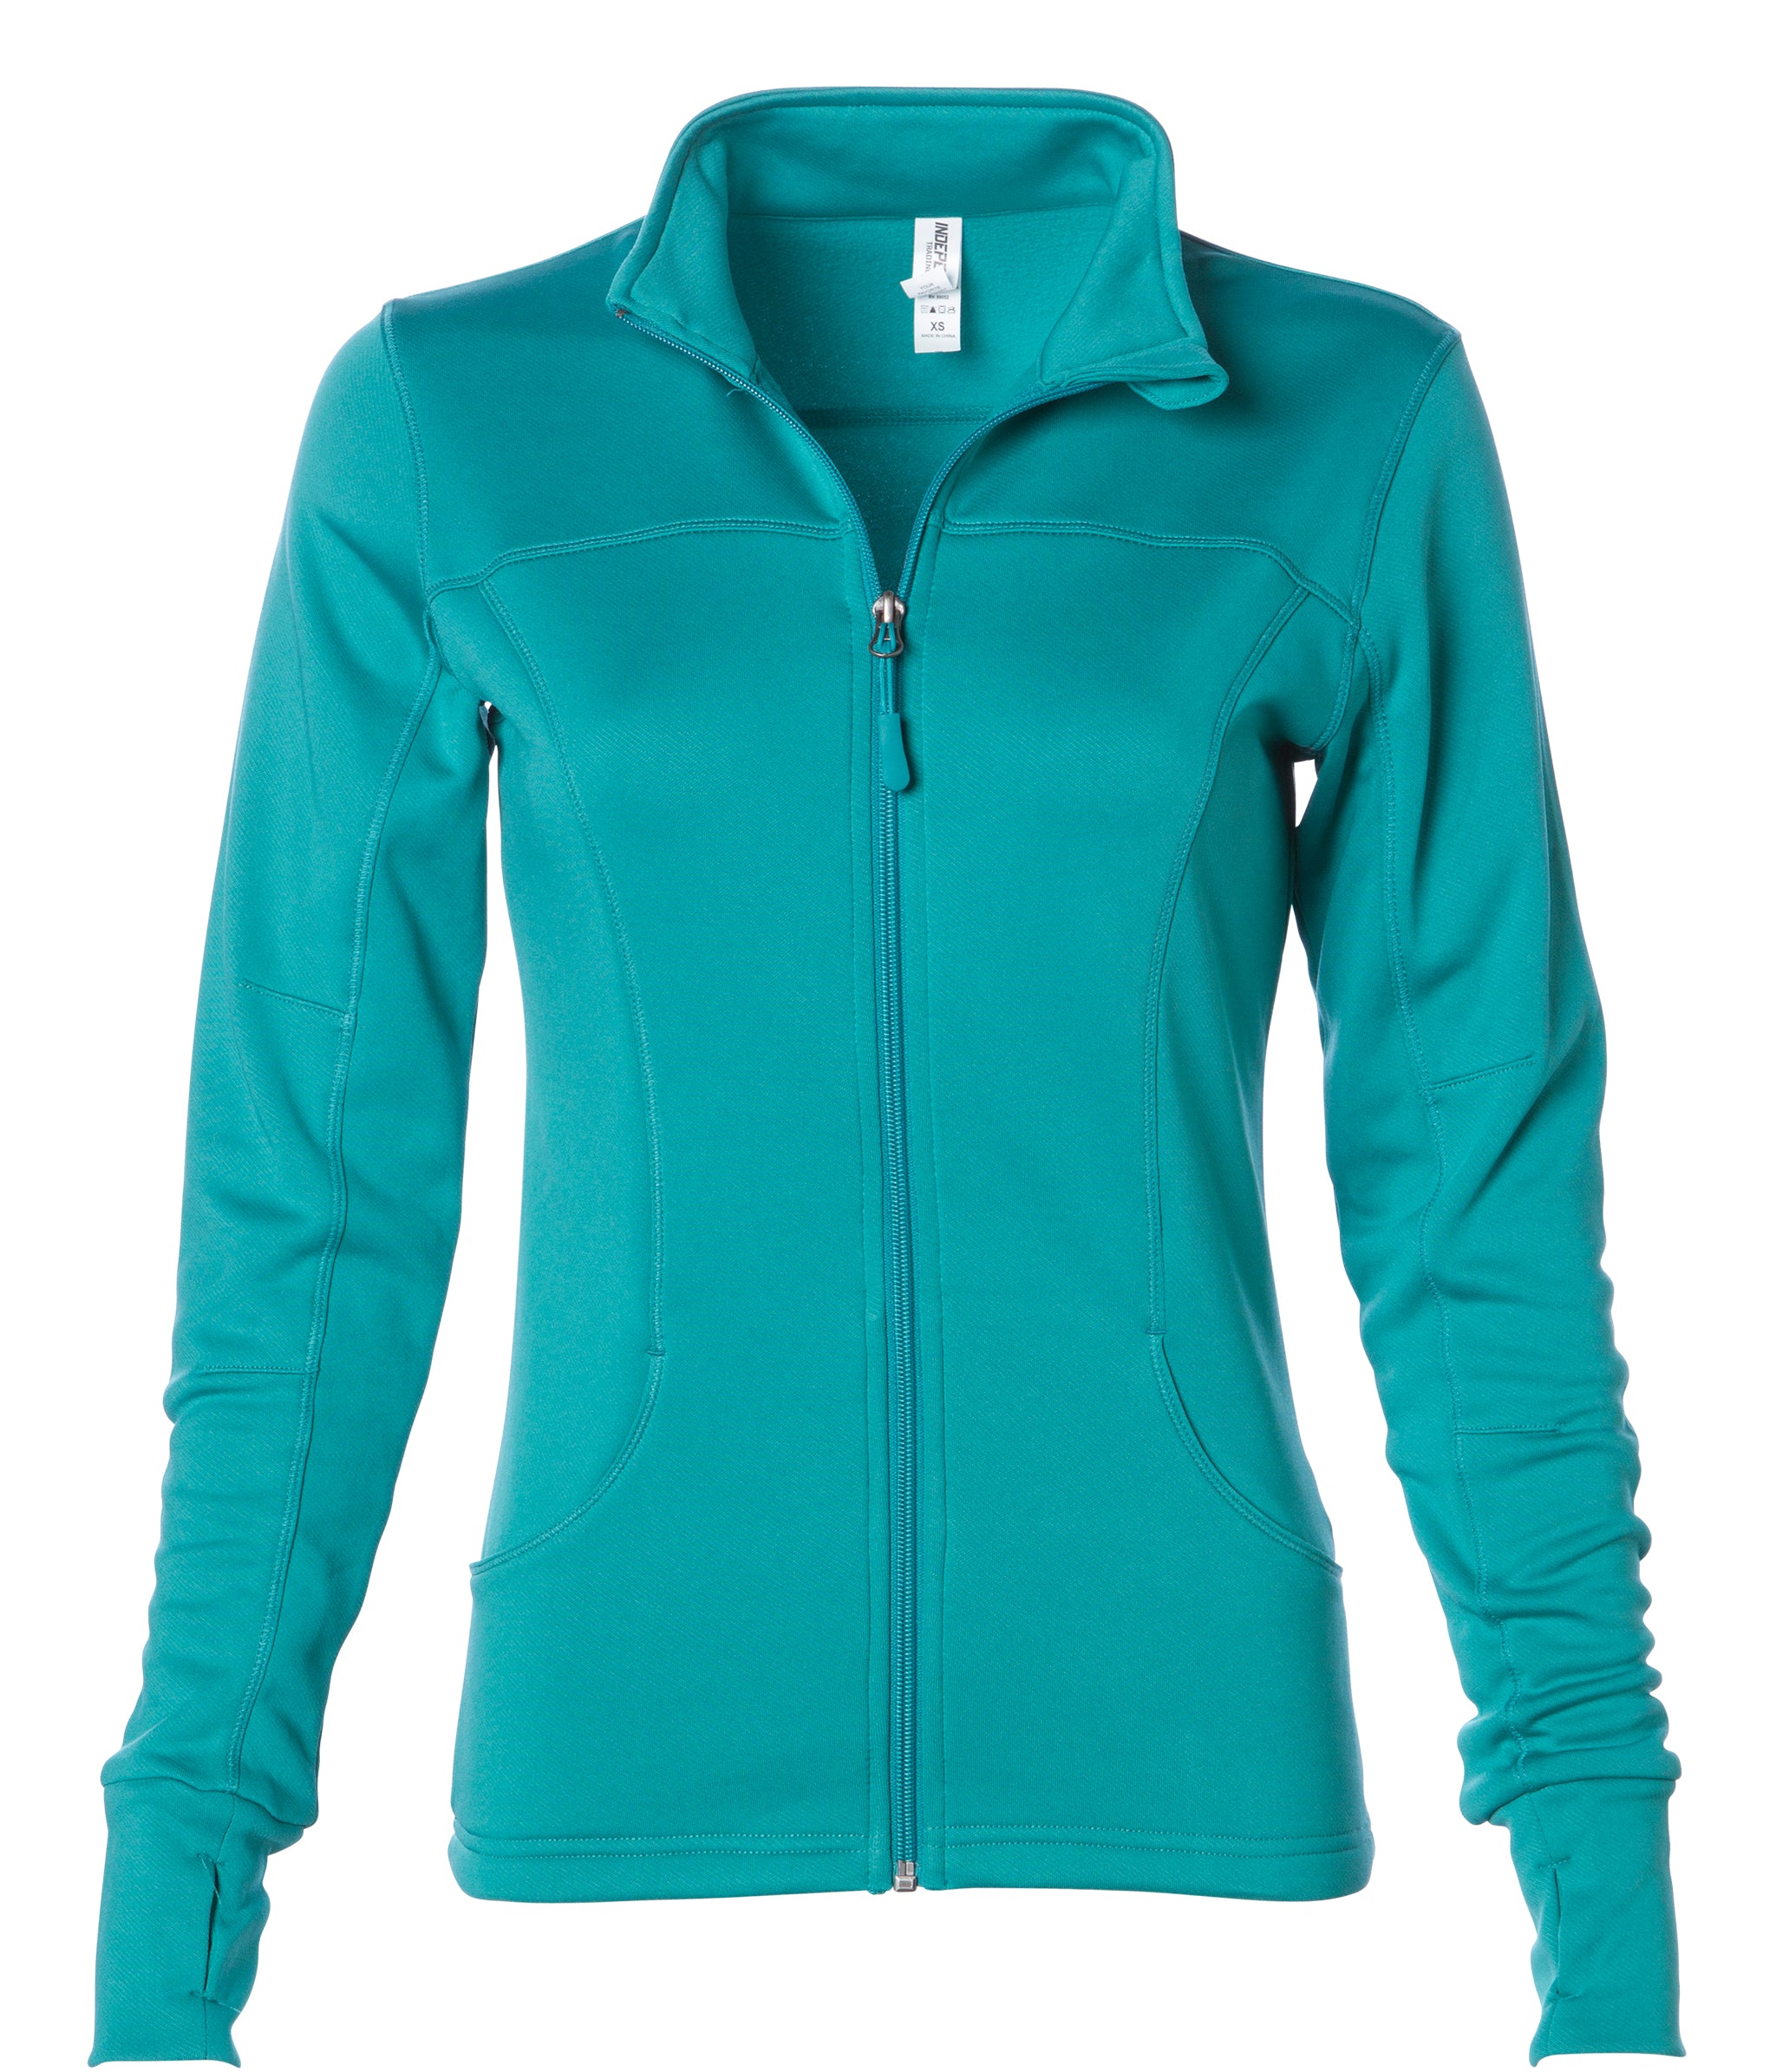 Independent Trading Co. EXP60PAZ Women's Poly-Tech Full-Zip Track Jacket - Lapis Green - S